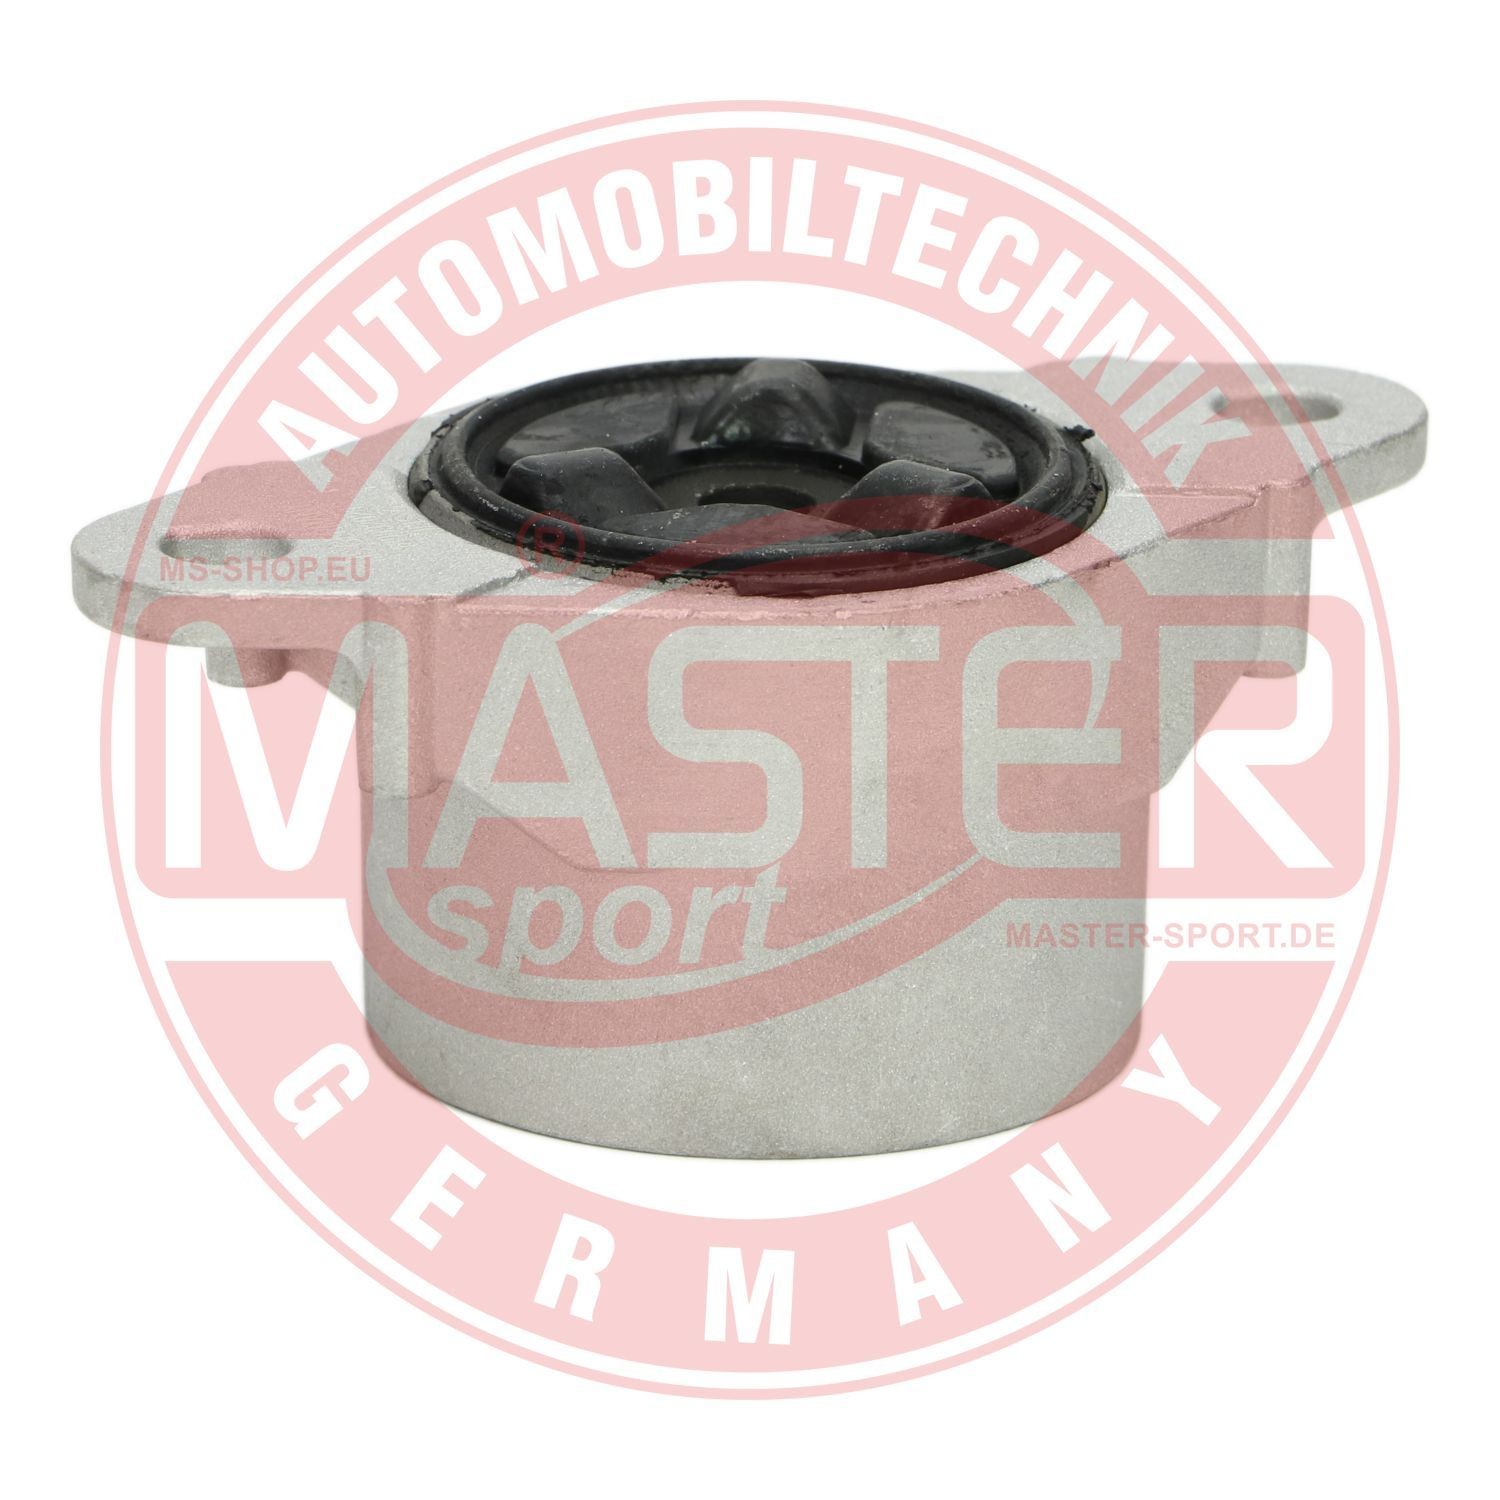 Mercedes A-Class Strut mount and bearing 16655998 MASTER-SPORT 180092020 online buy